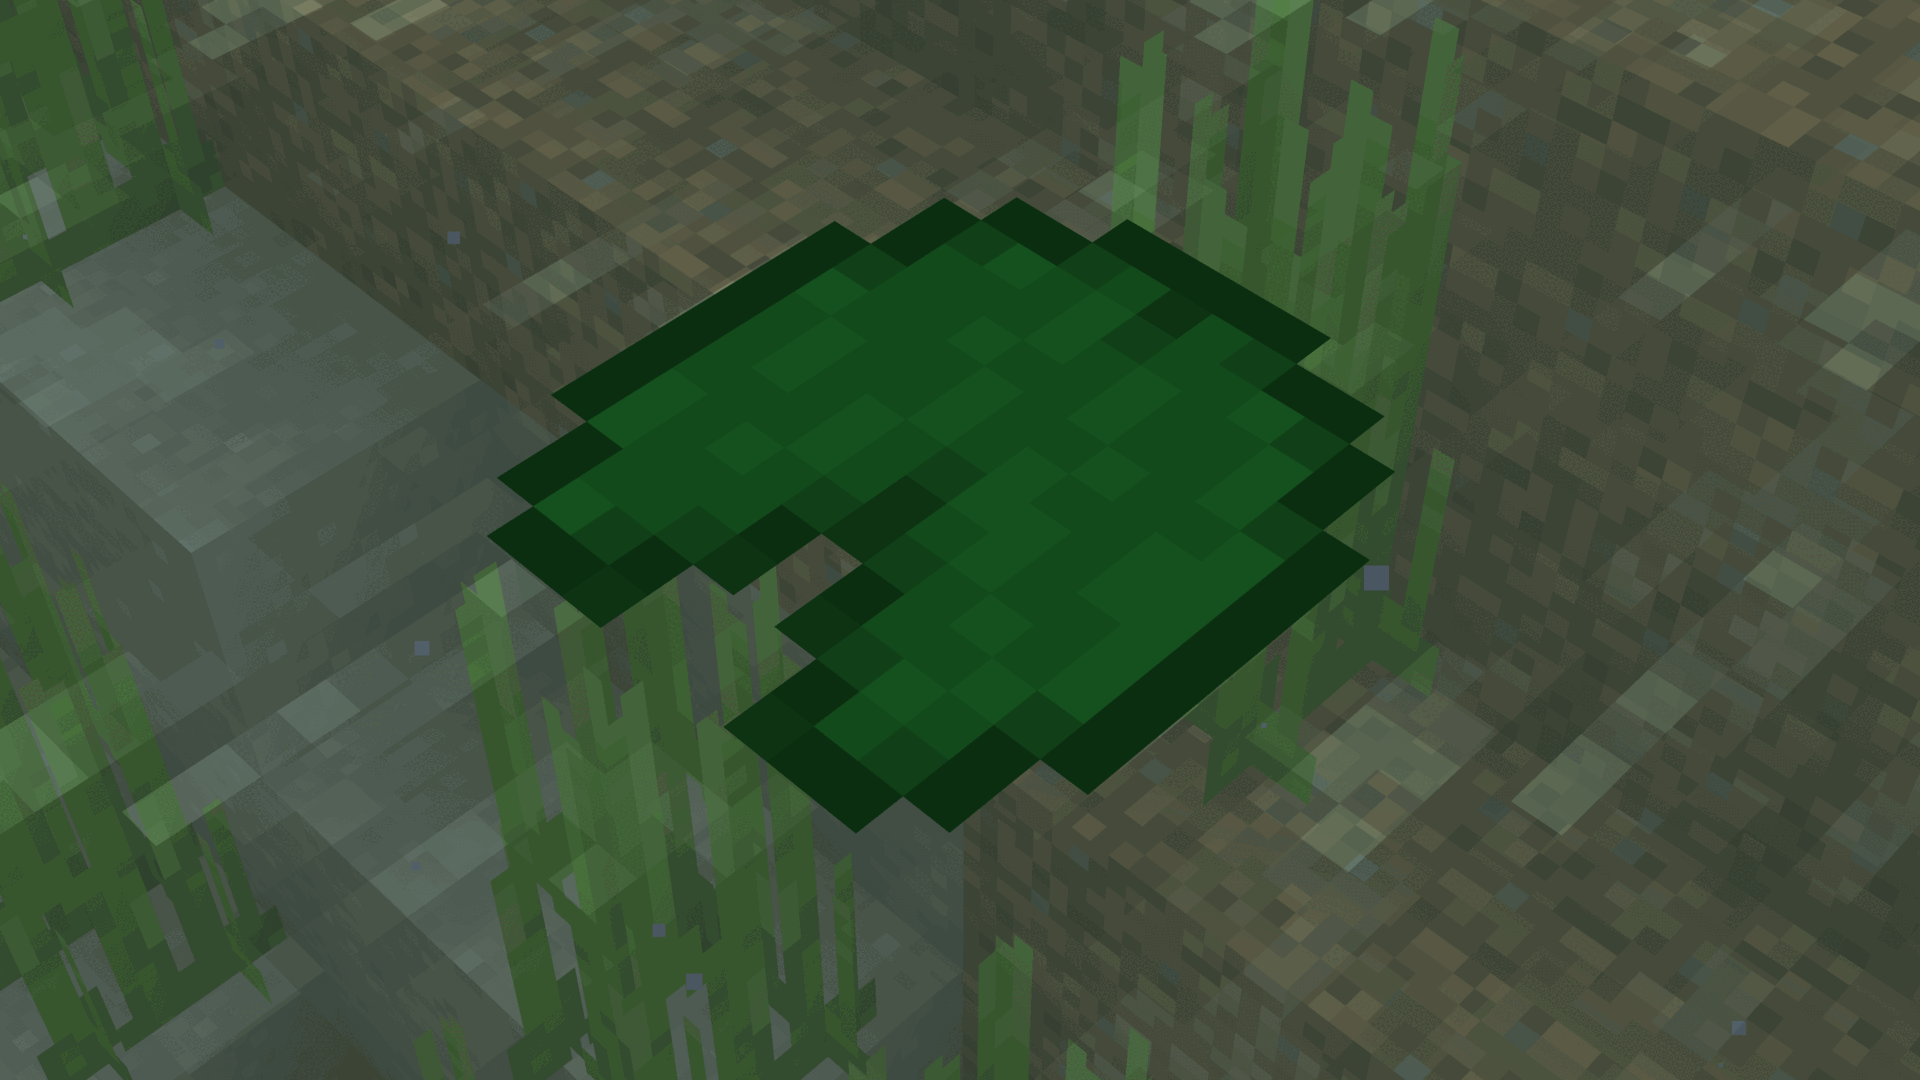 A comparison between normal normal lily pads and lily pads from the texture